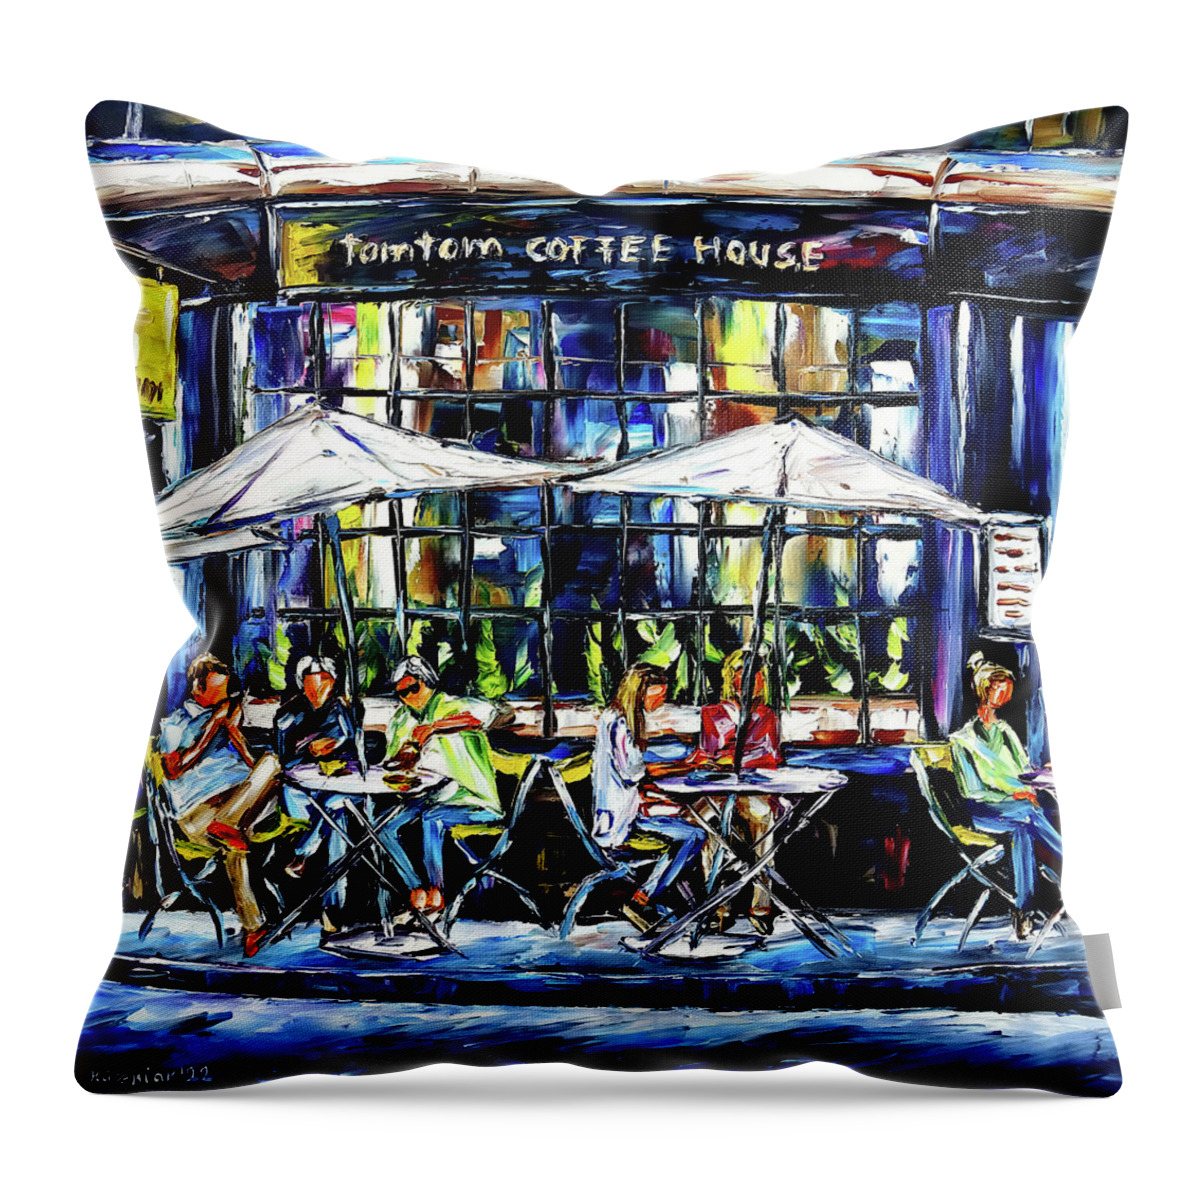 London Cafe Throw Pillow featuring the painting Tomtom Coffee House, London by Mirek Kuzniar